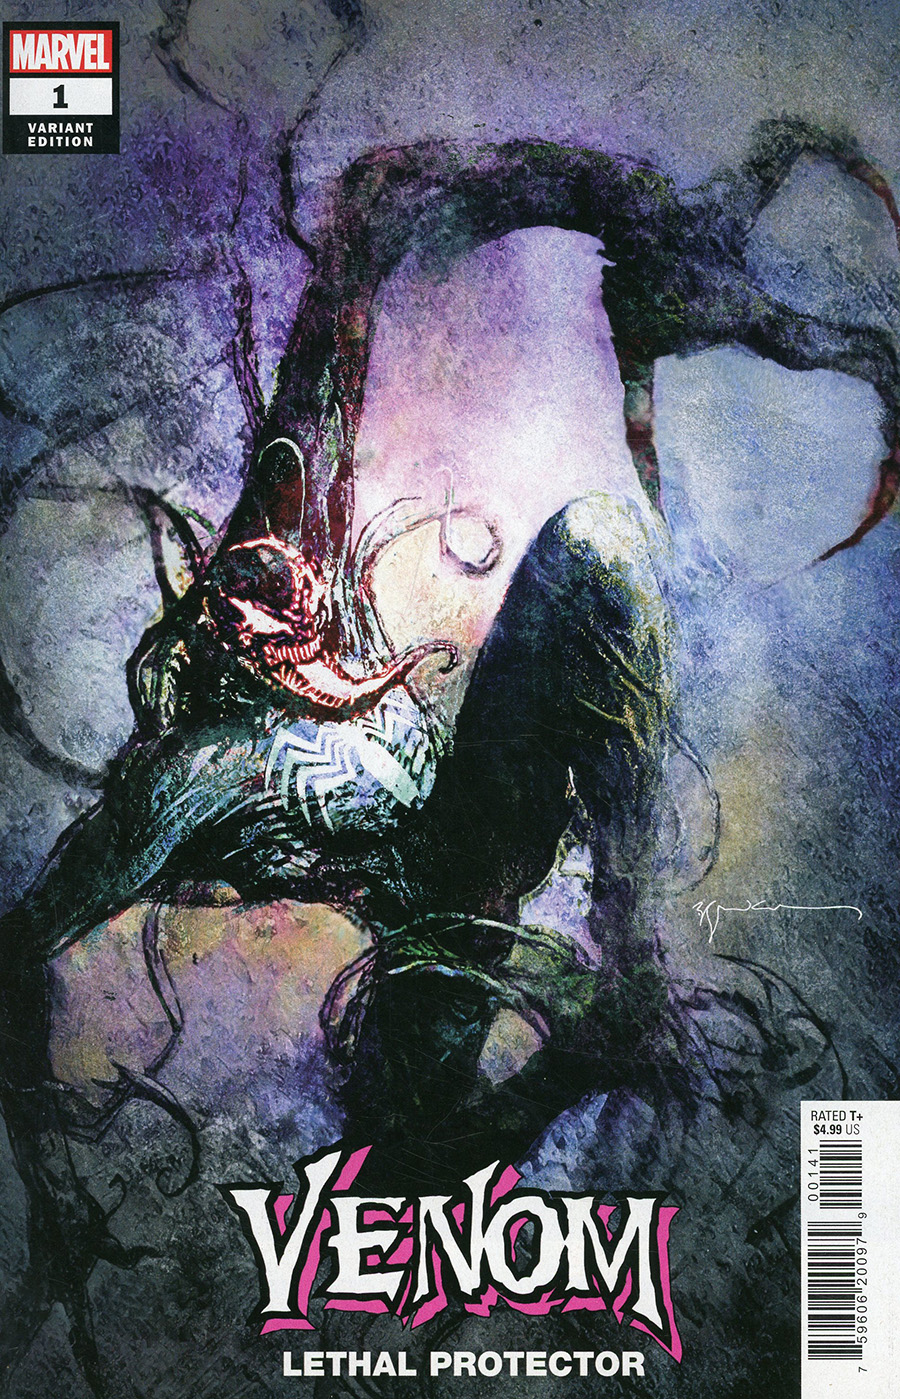 Venom Lethal Protector Vol 2 #1 Cover C Variant Bill Sienkiewicz Cover